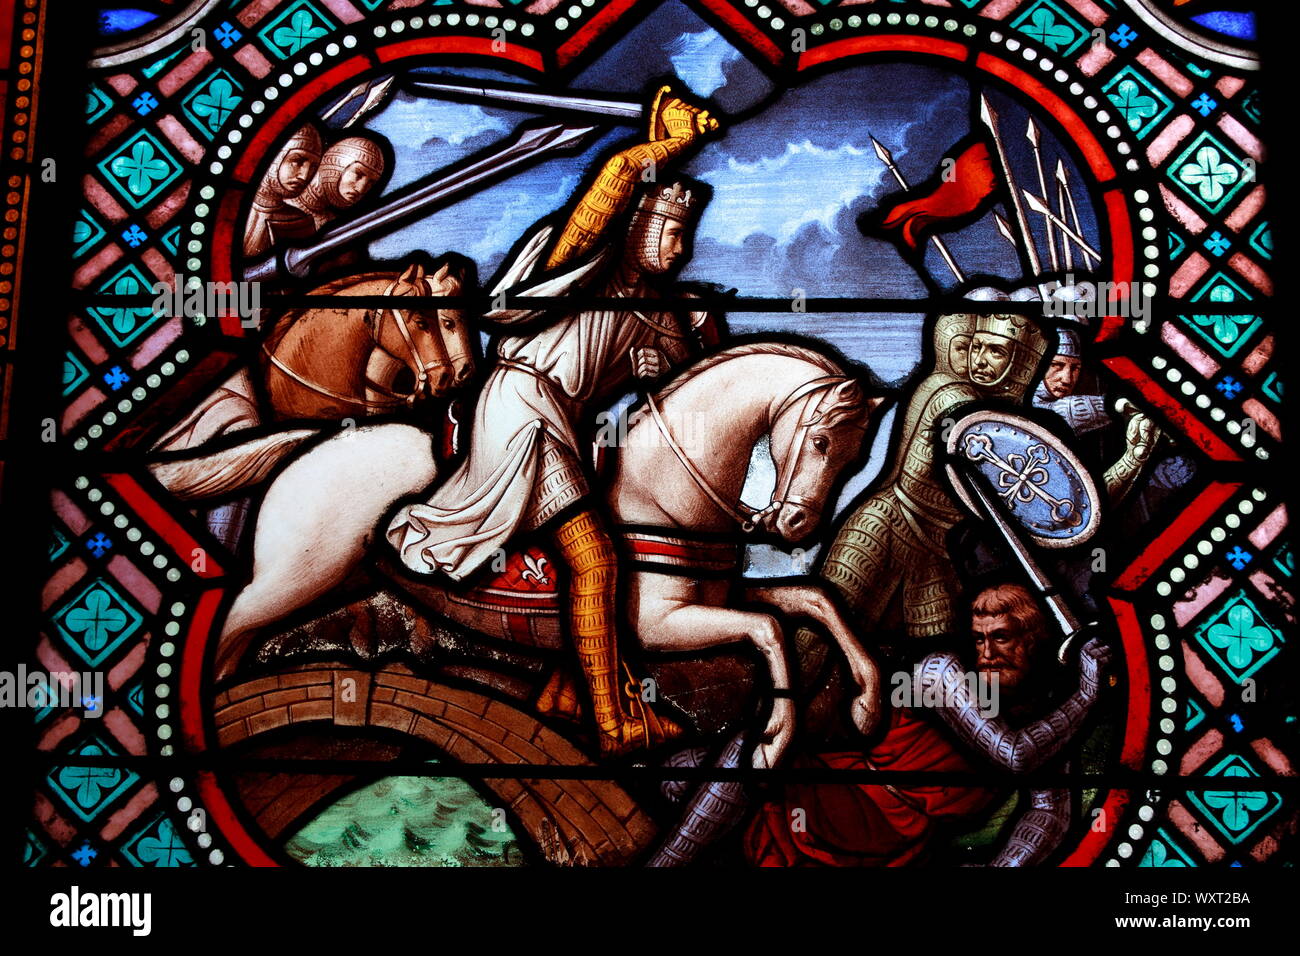 Stained glass window depicting the life of St. Louis (Louis IX), Senlis Cathedral, Senlis, Oise, France, Europe Stock Photo